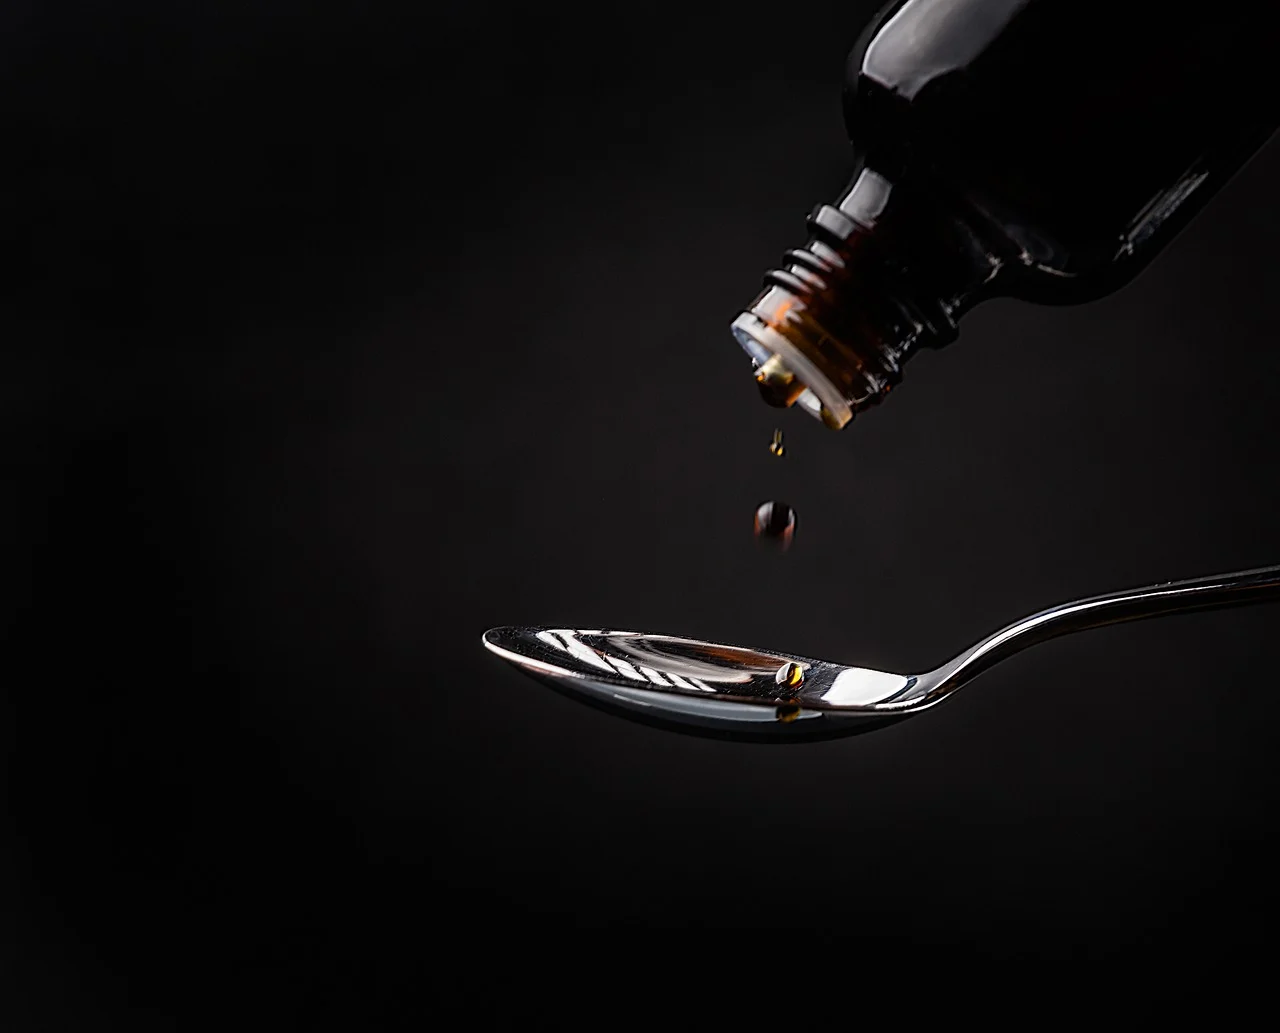 Cough syrup being measured with a spoon.